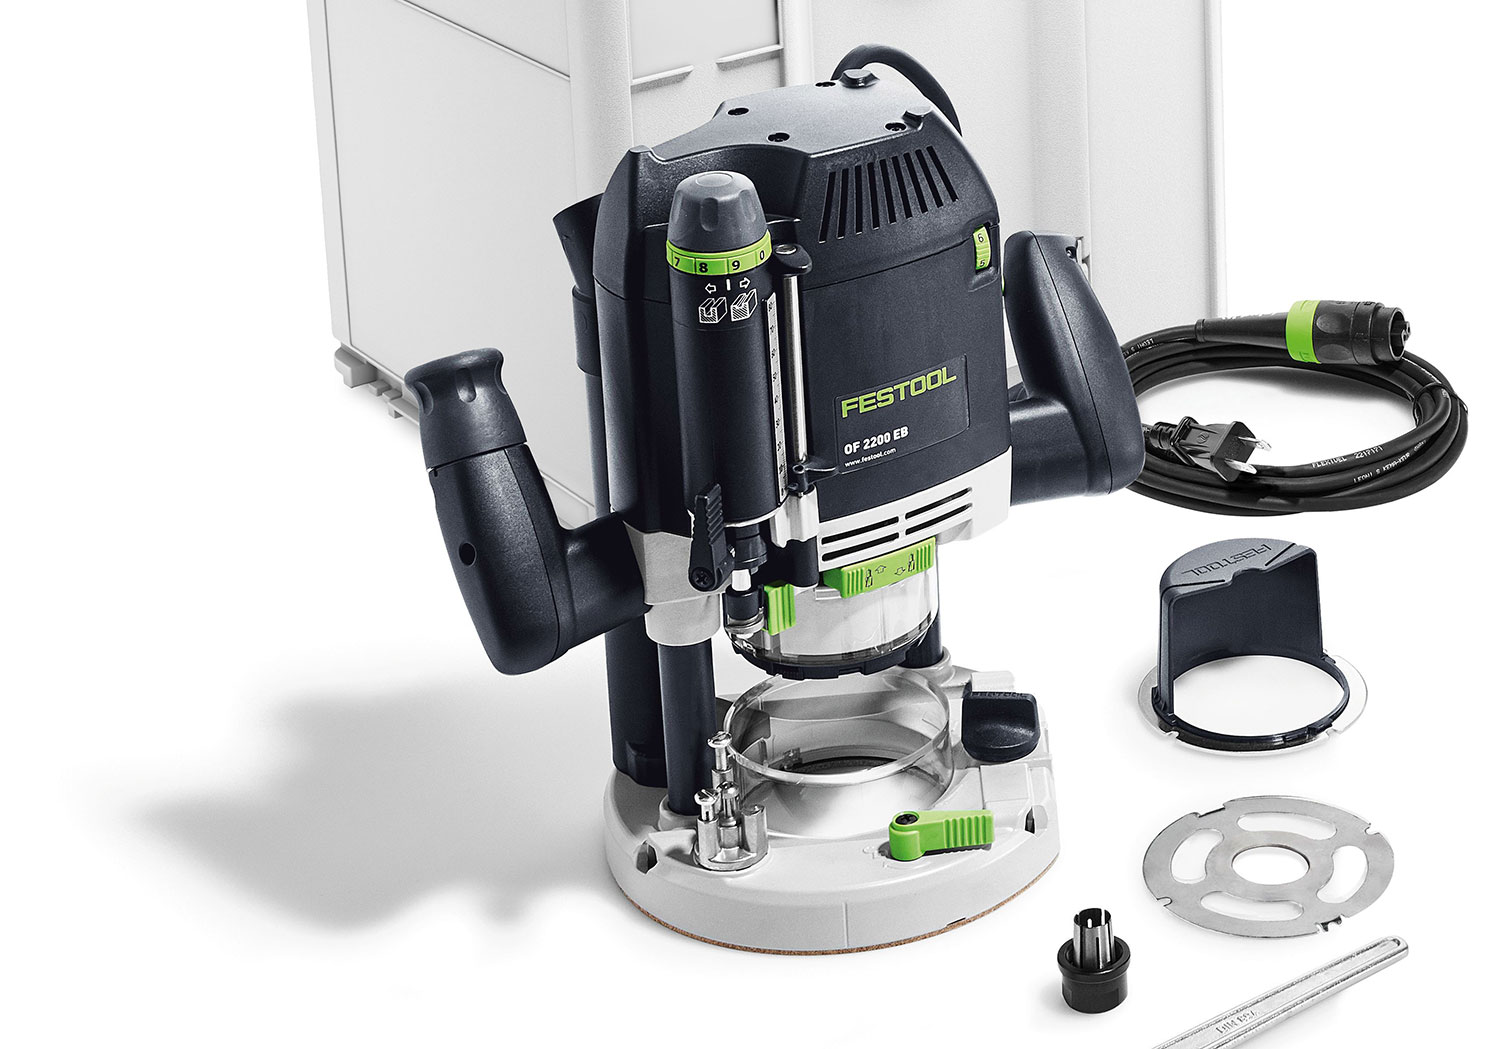 The Festool OF1010 Router